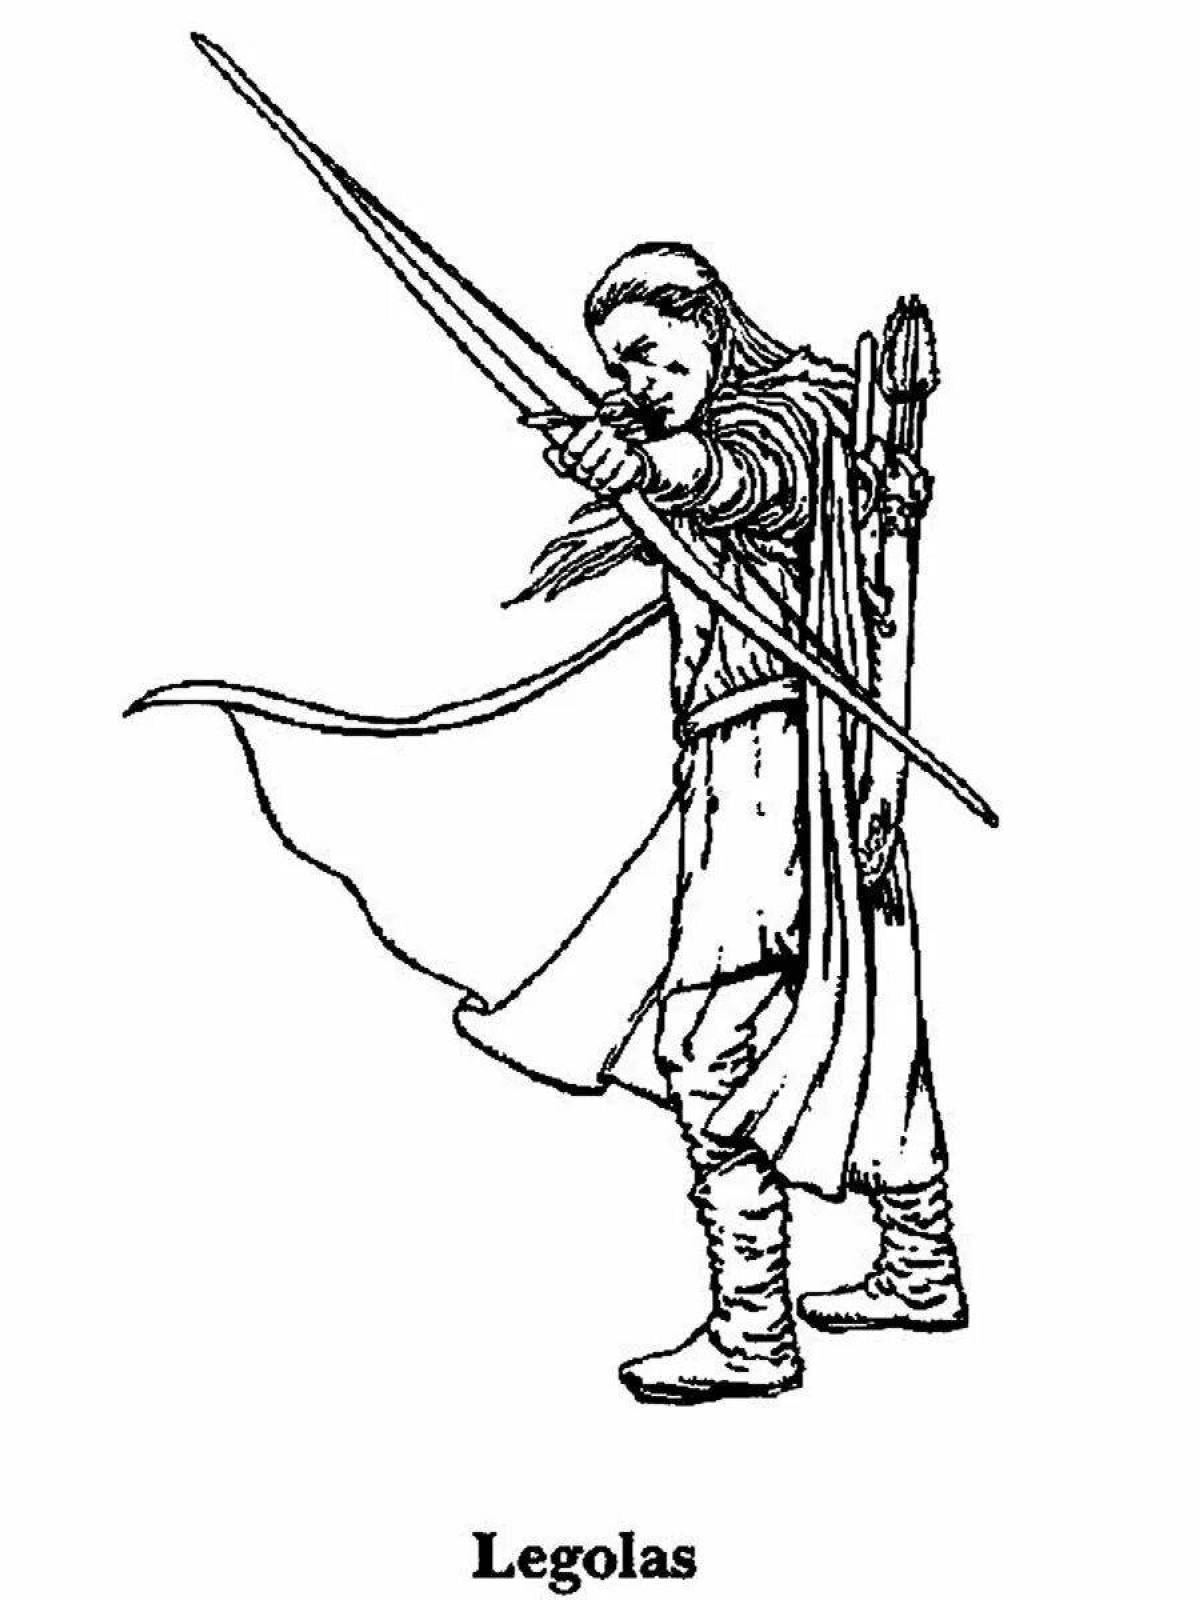 Experienced archer coloring page